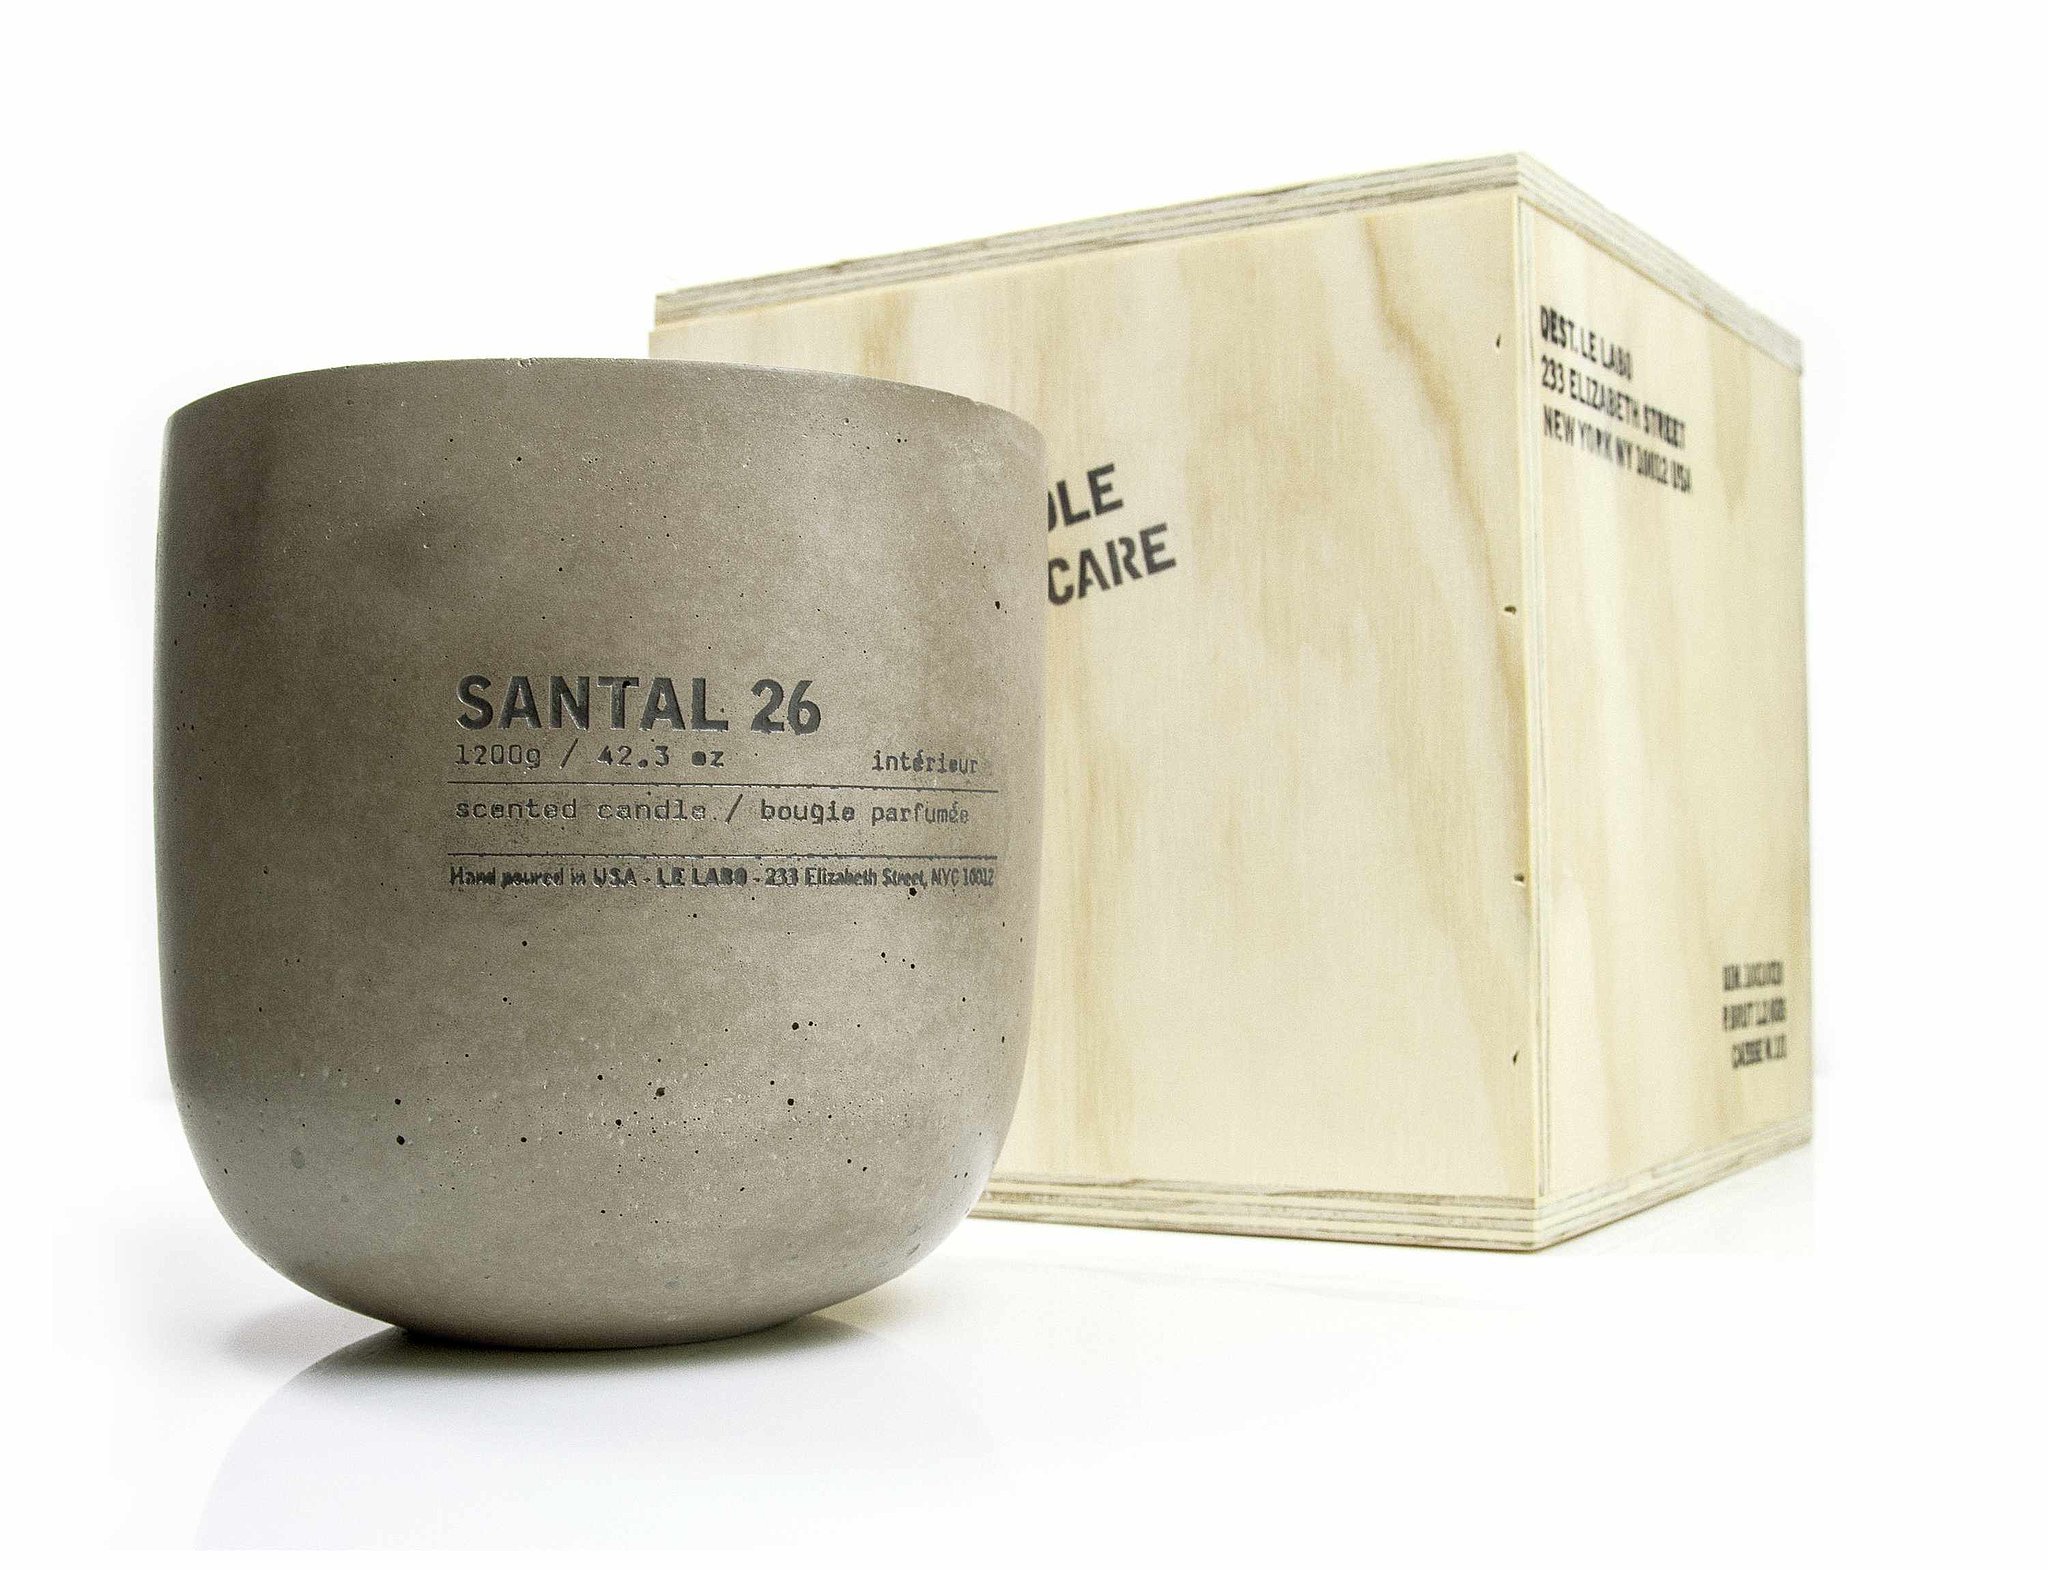 Le Labo Santal 26 Concrete Candle 10 Favorite Things Andrea Stanford of Hunters Alley